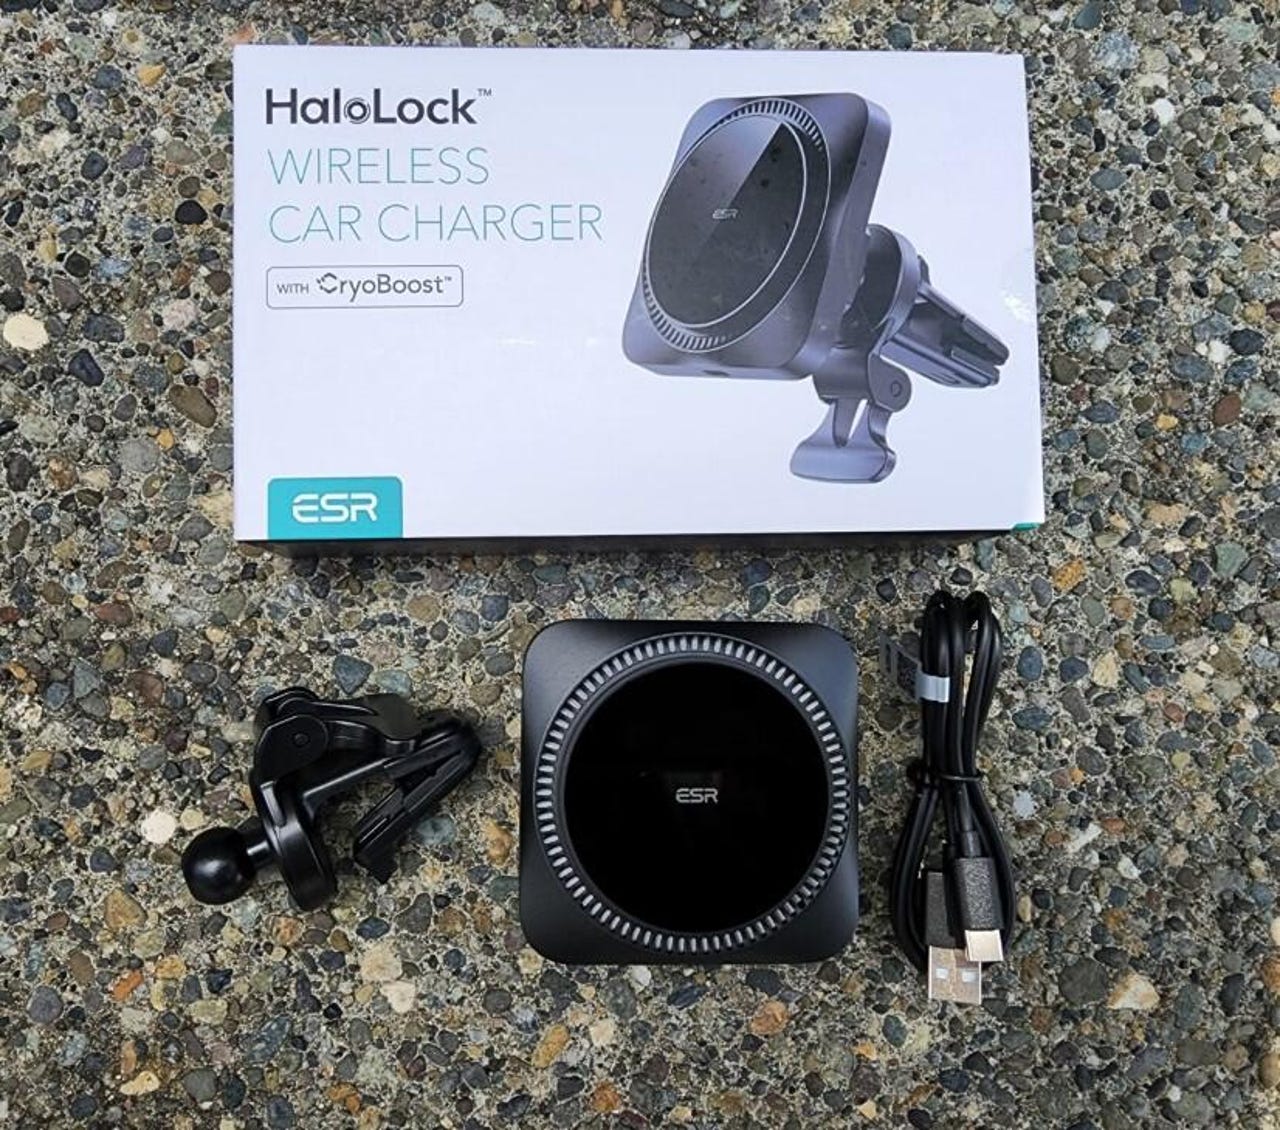 ESR Halolock MagSafe Wireless Car Charger with CryoBoost